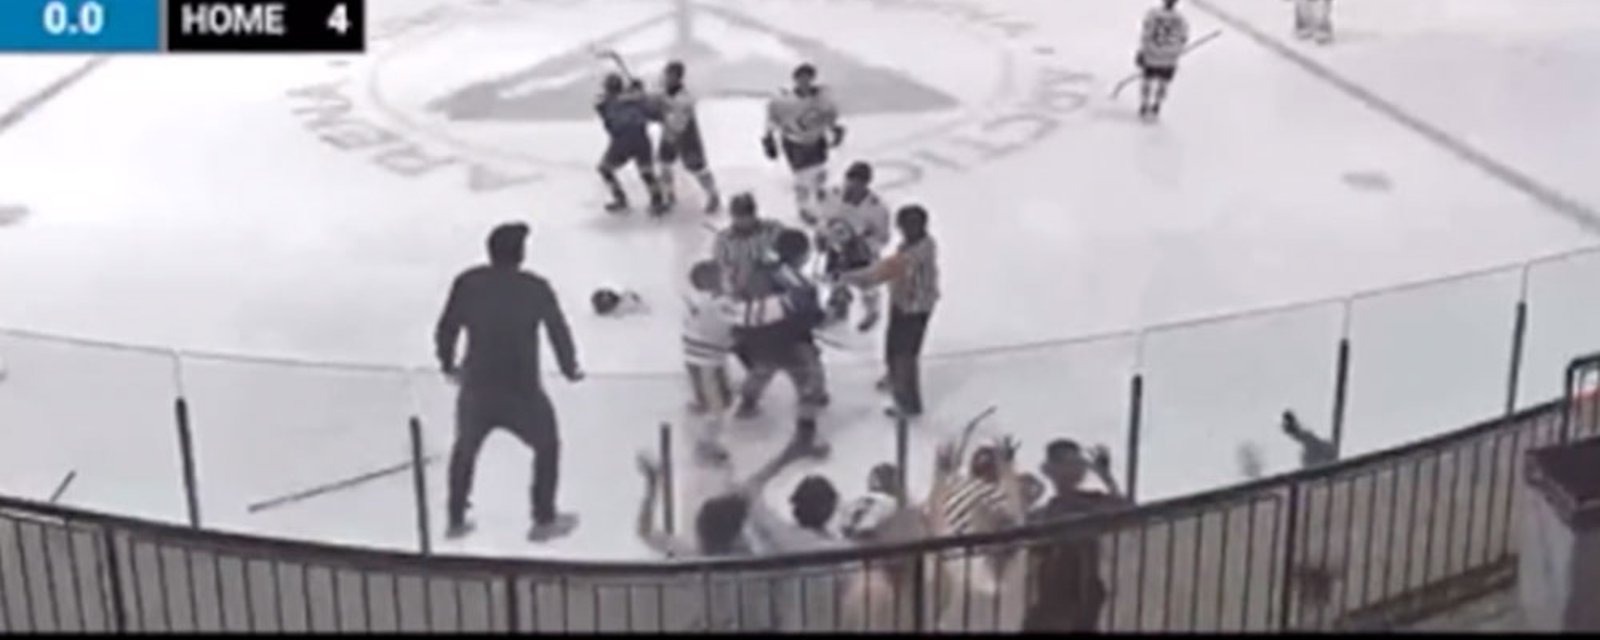 Hockey Dad tries to get on the ice to help his son, gets absolutely clocked by opposing fan